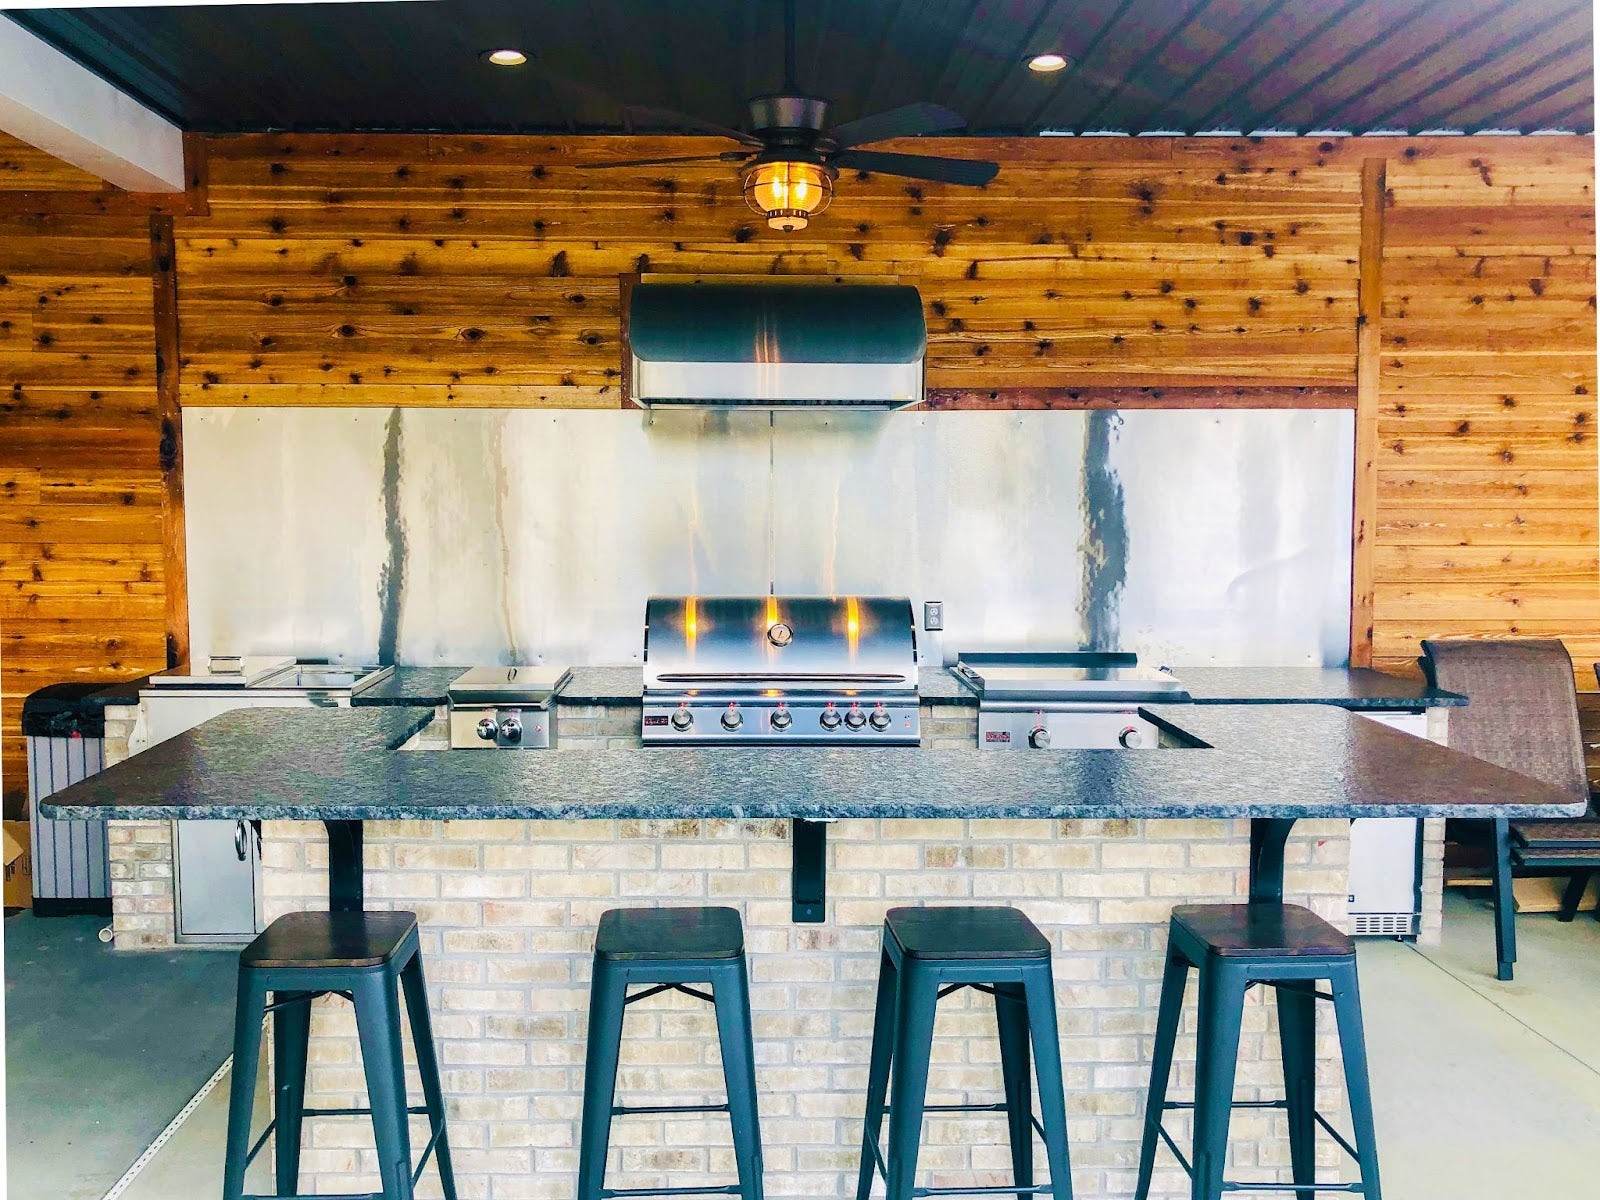 Outdoor entertainment space with a Proline range hood over a built-in grill, set against a backdrop of wood planks, brickwork, and a granite bar with stools - prolinerangehoods.com.